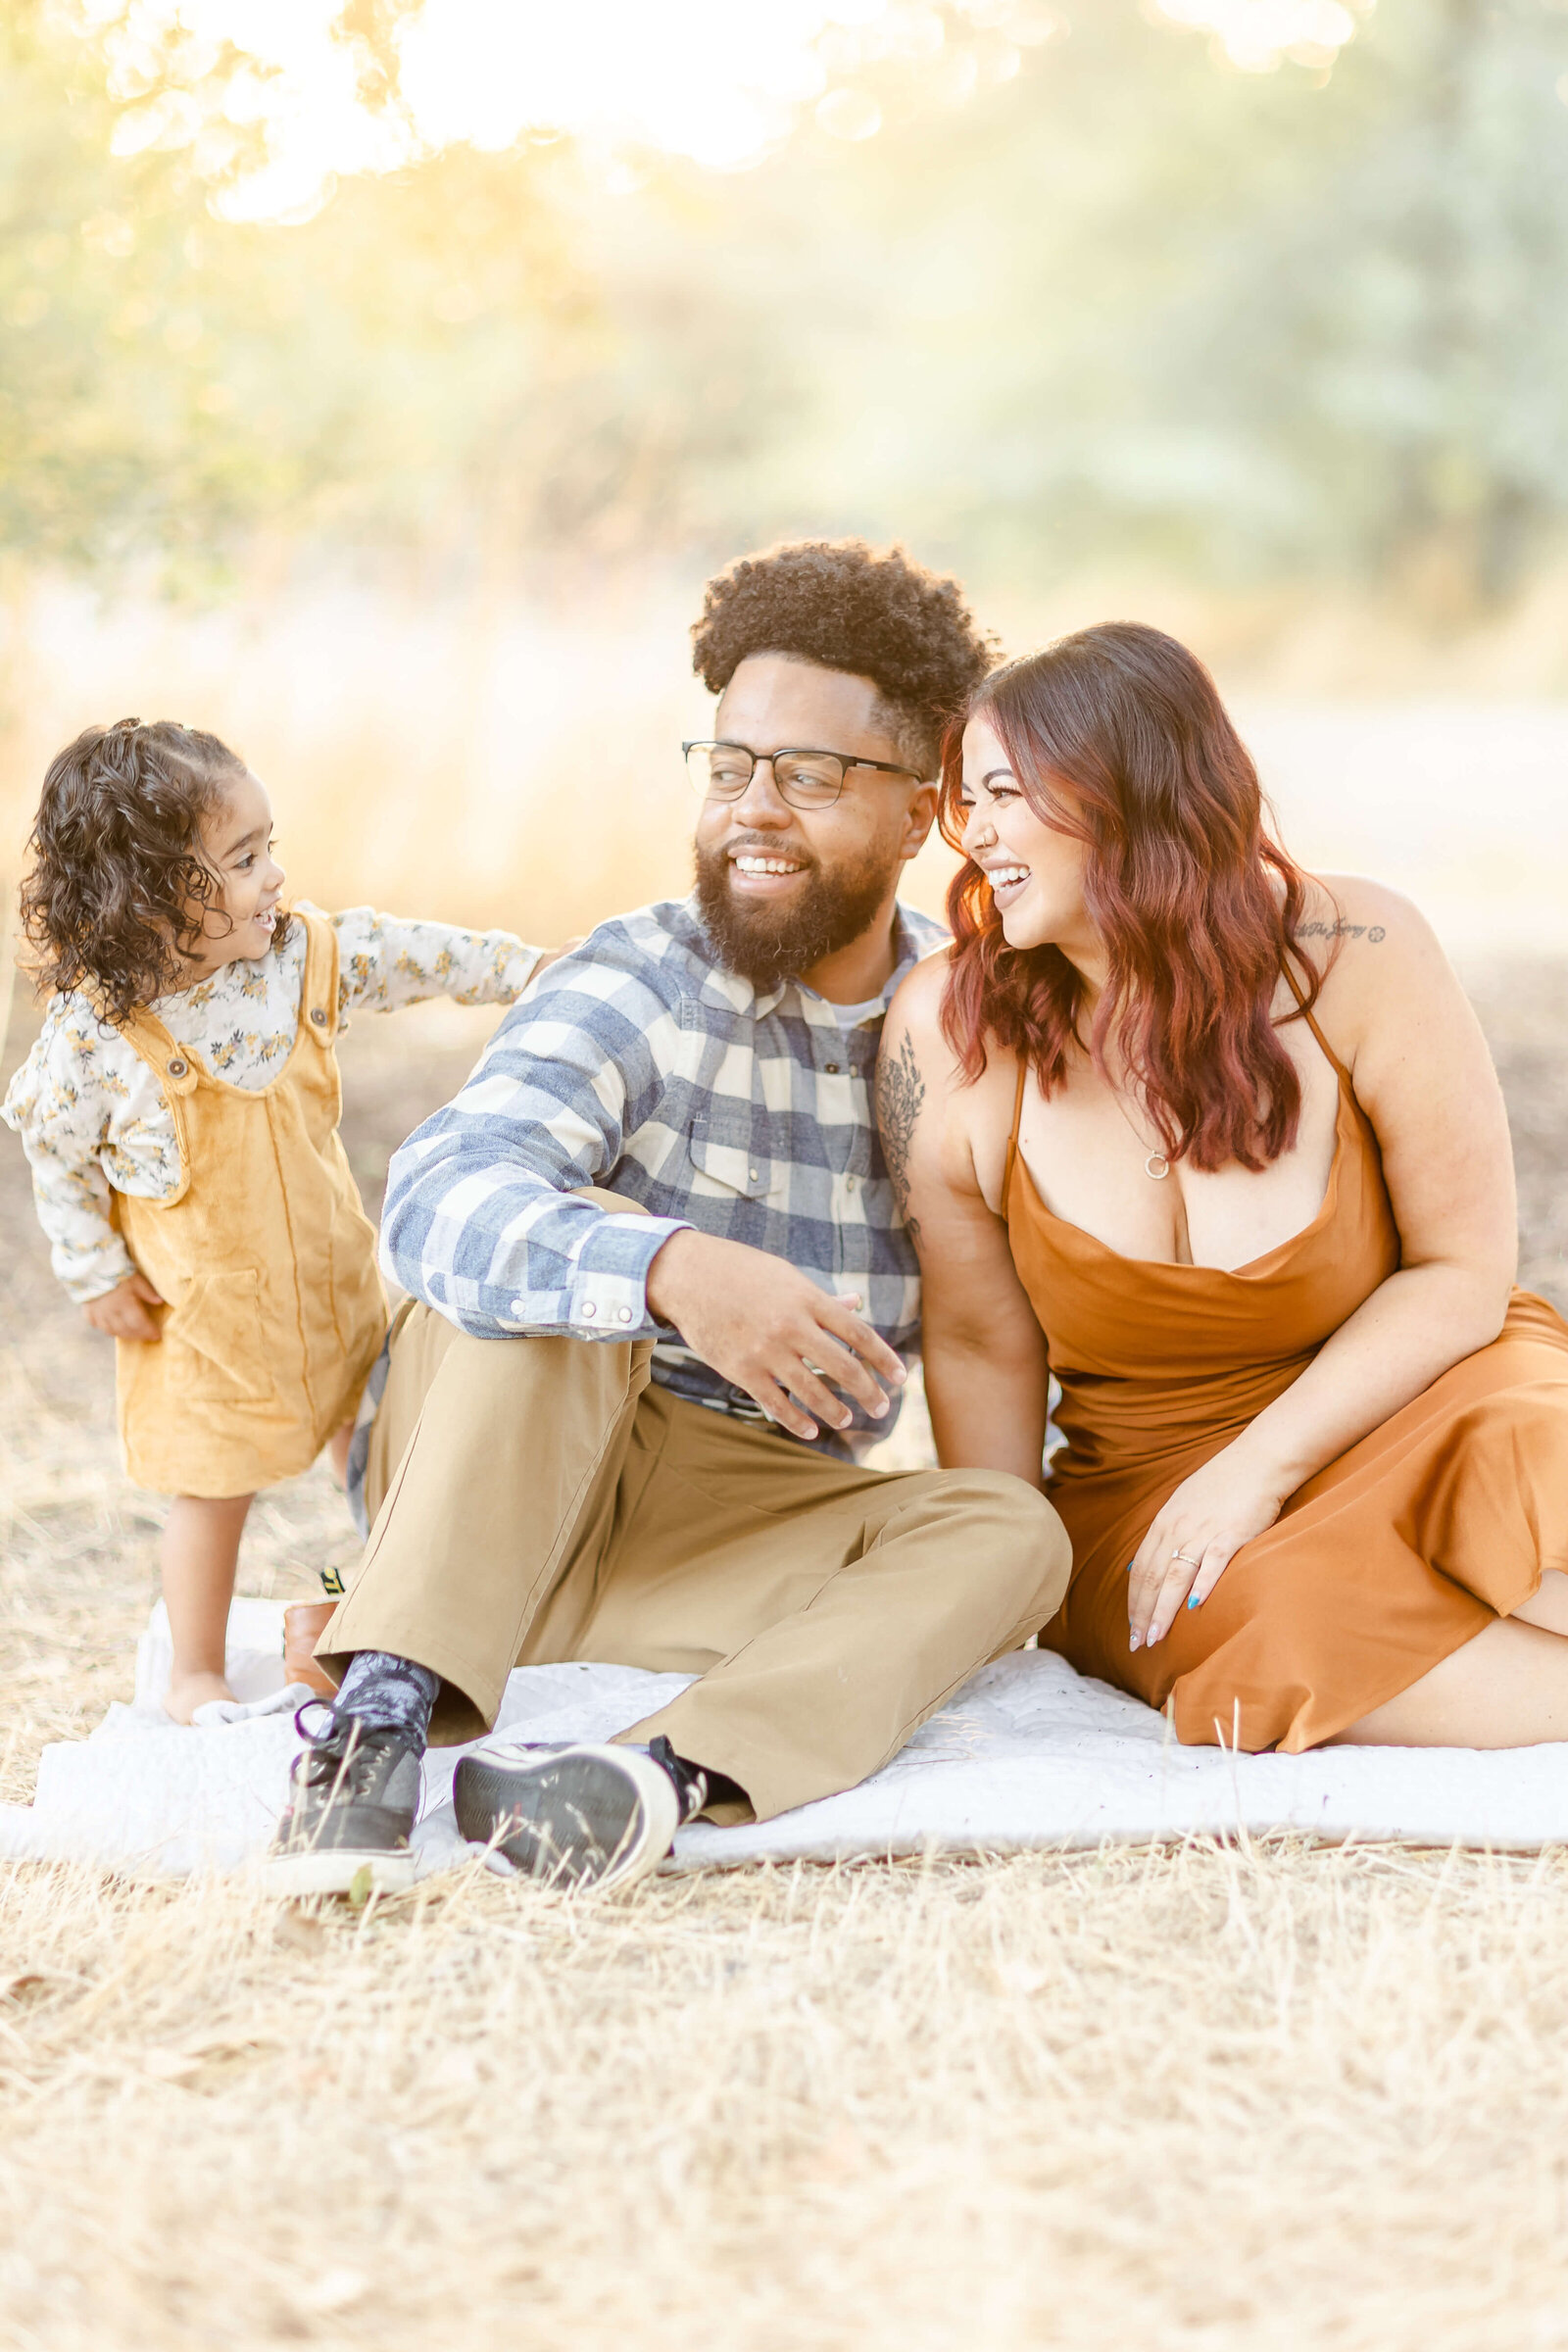 A family smiling at each other during a photoshoot